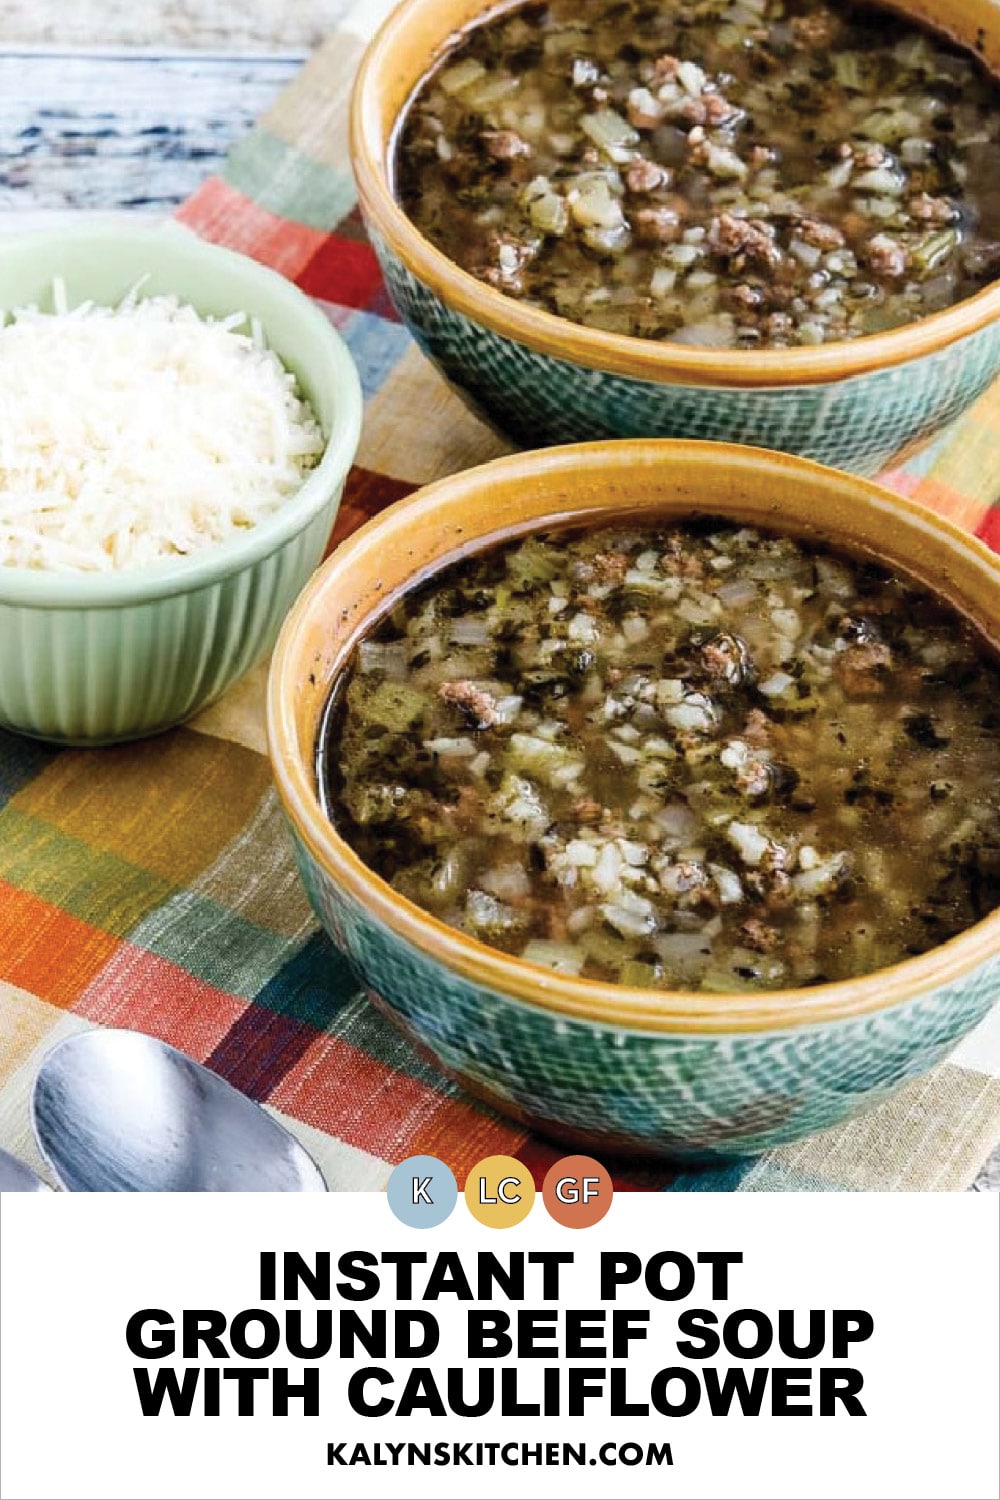 Pinterest image of Instant Pot Ground Beef Soup with Cauliflower